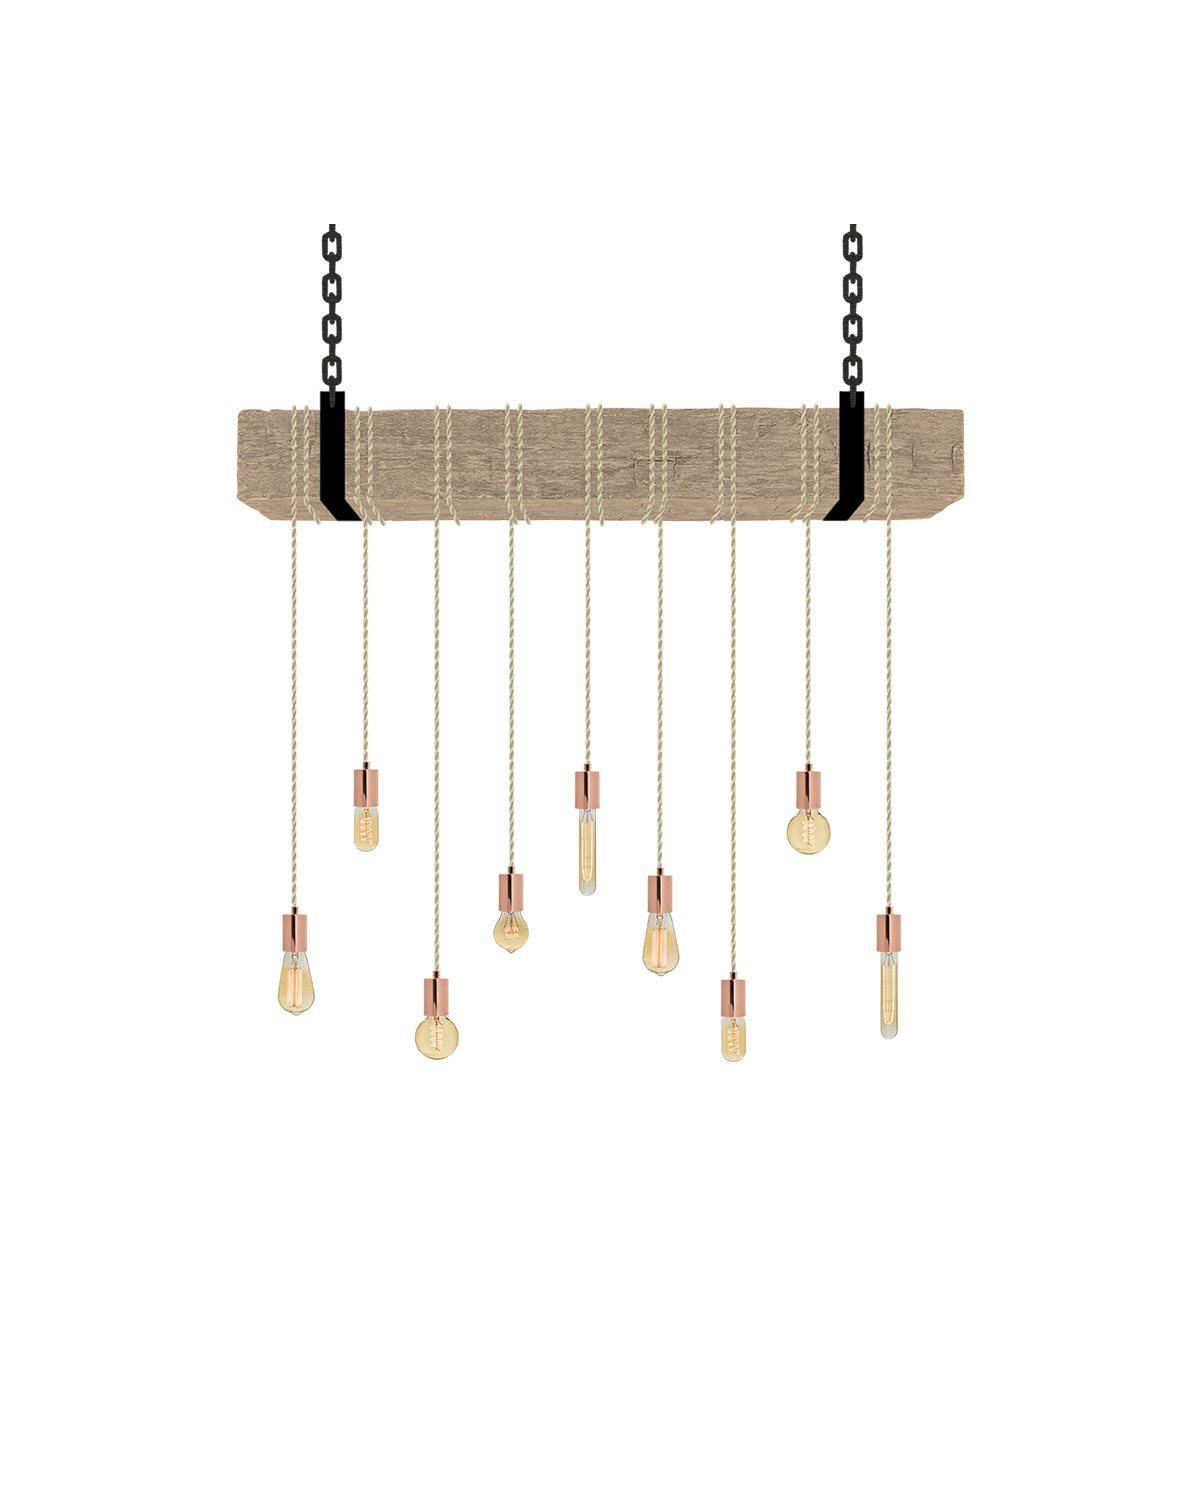 Faux Beam 9 Pendant Wrap: Beige and Copper Hangout Lighting 4' Beam